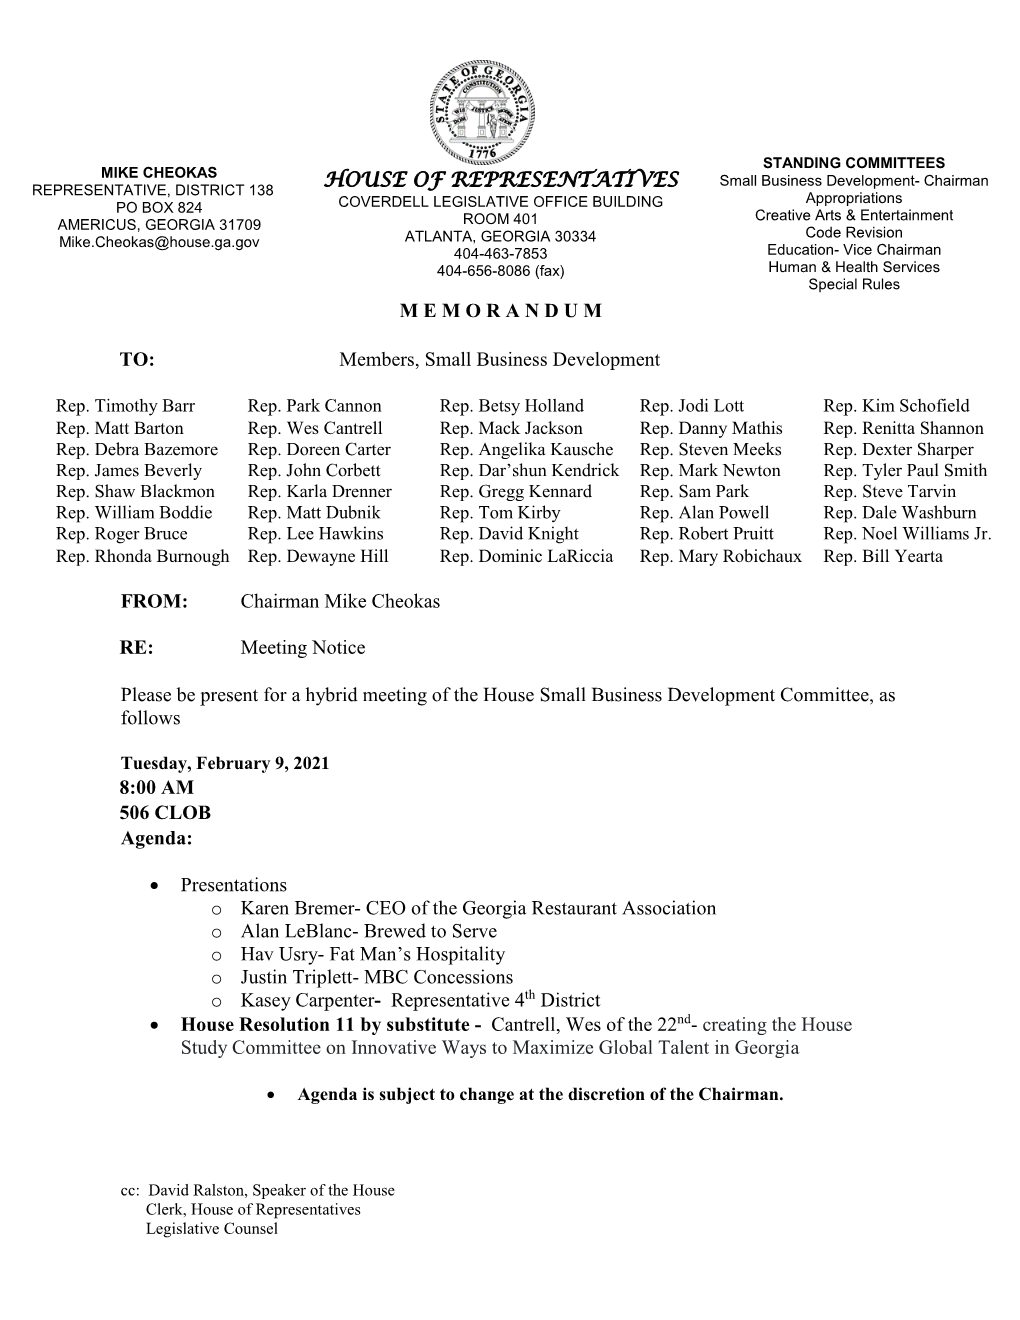 HOUSE of REPRESENTATIVES M E M O R a N D U M TO: Members, Small Business Development FROM: Chairman Mike Cheokas RE: Meeting